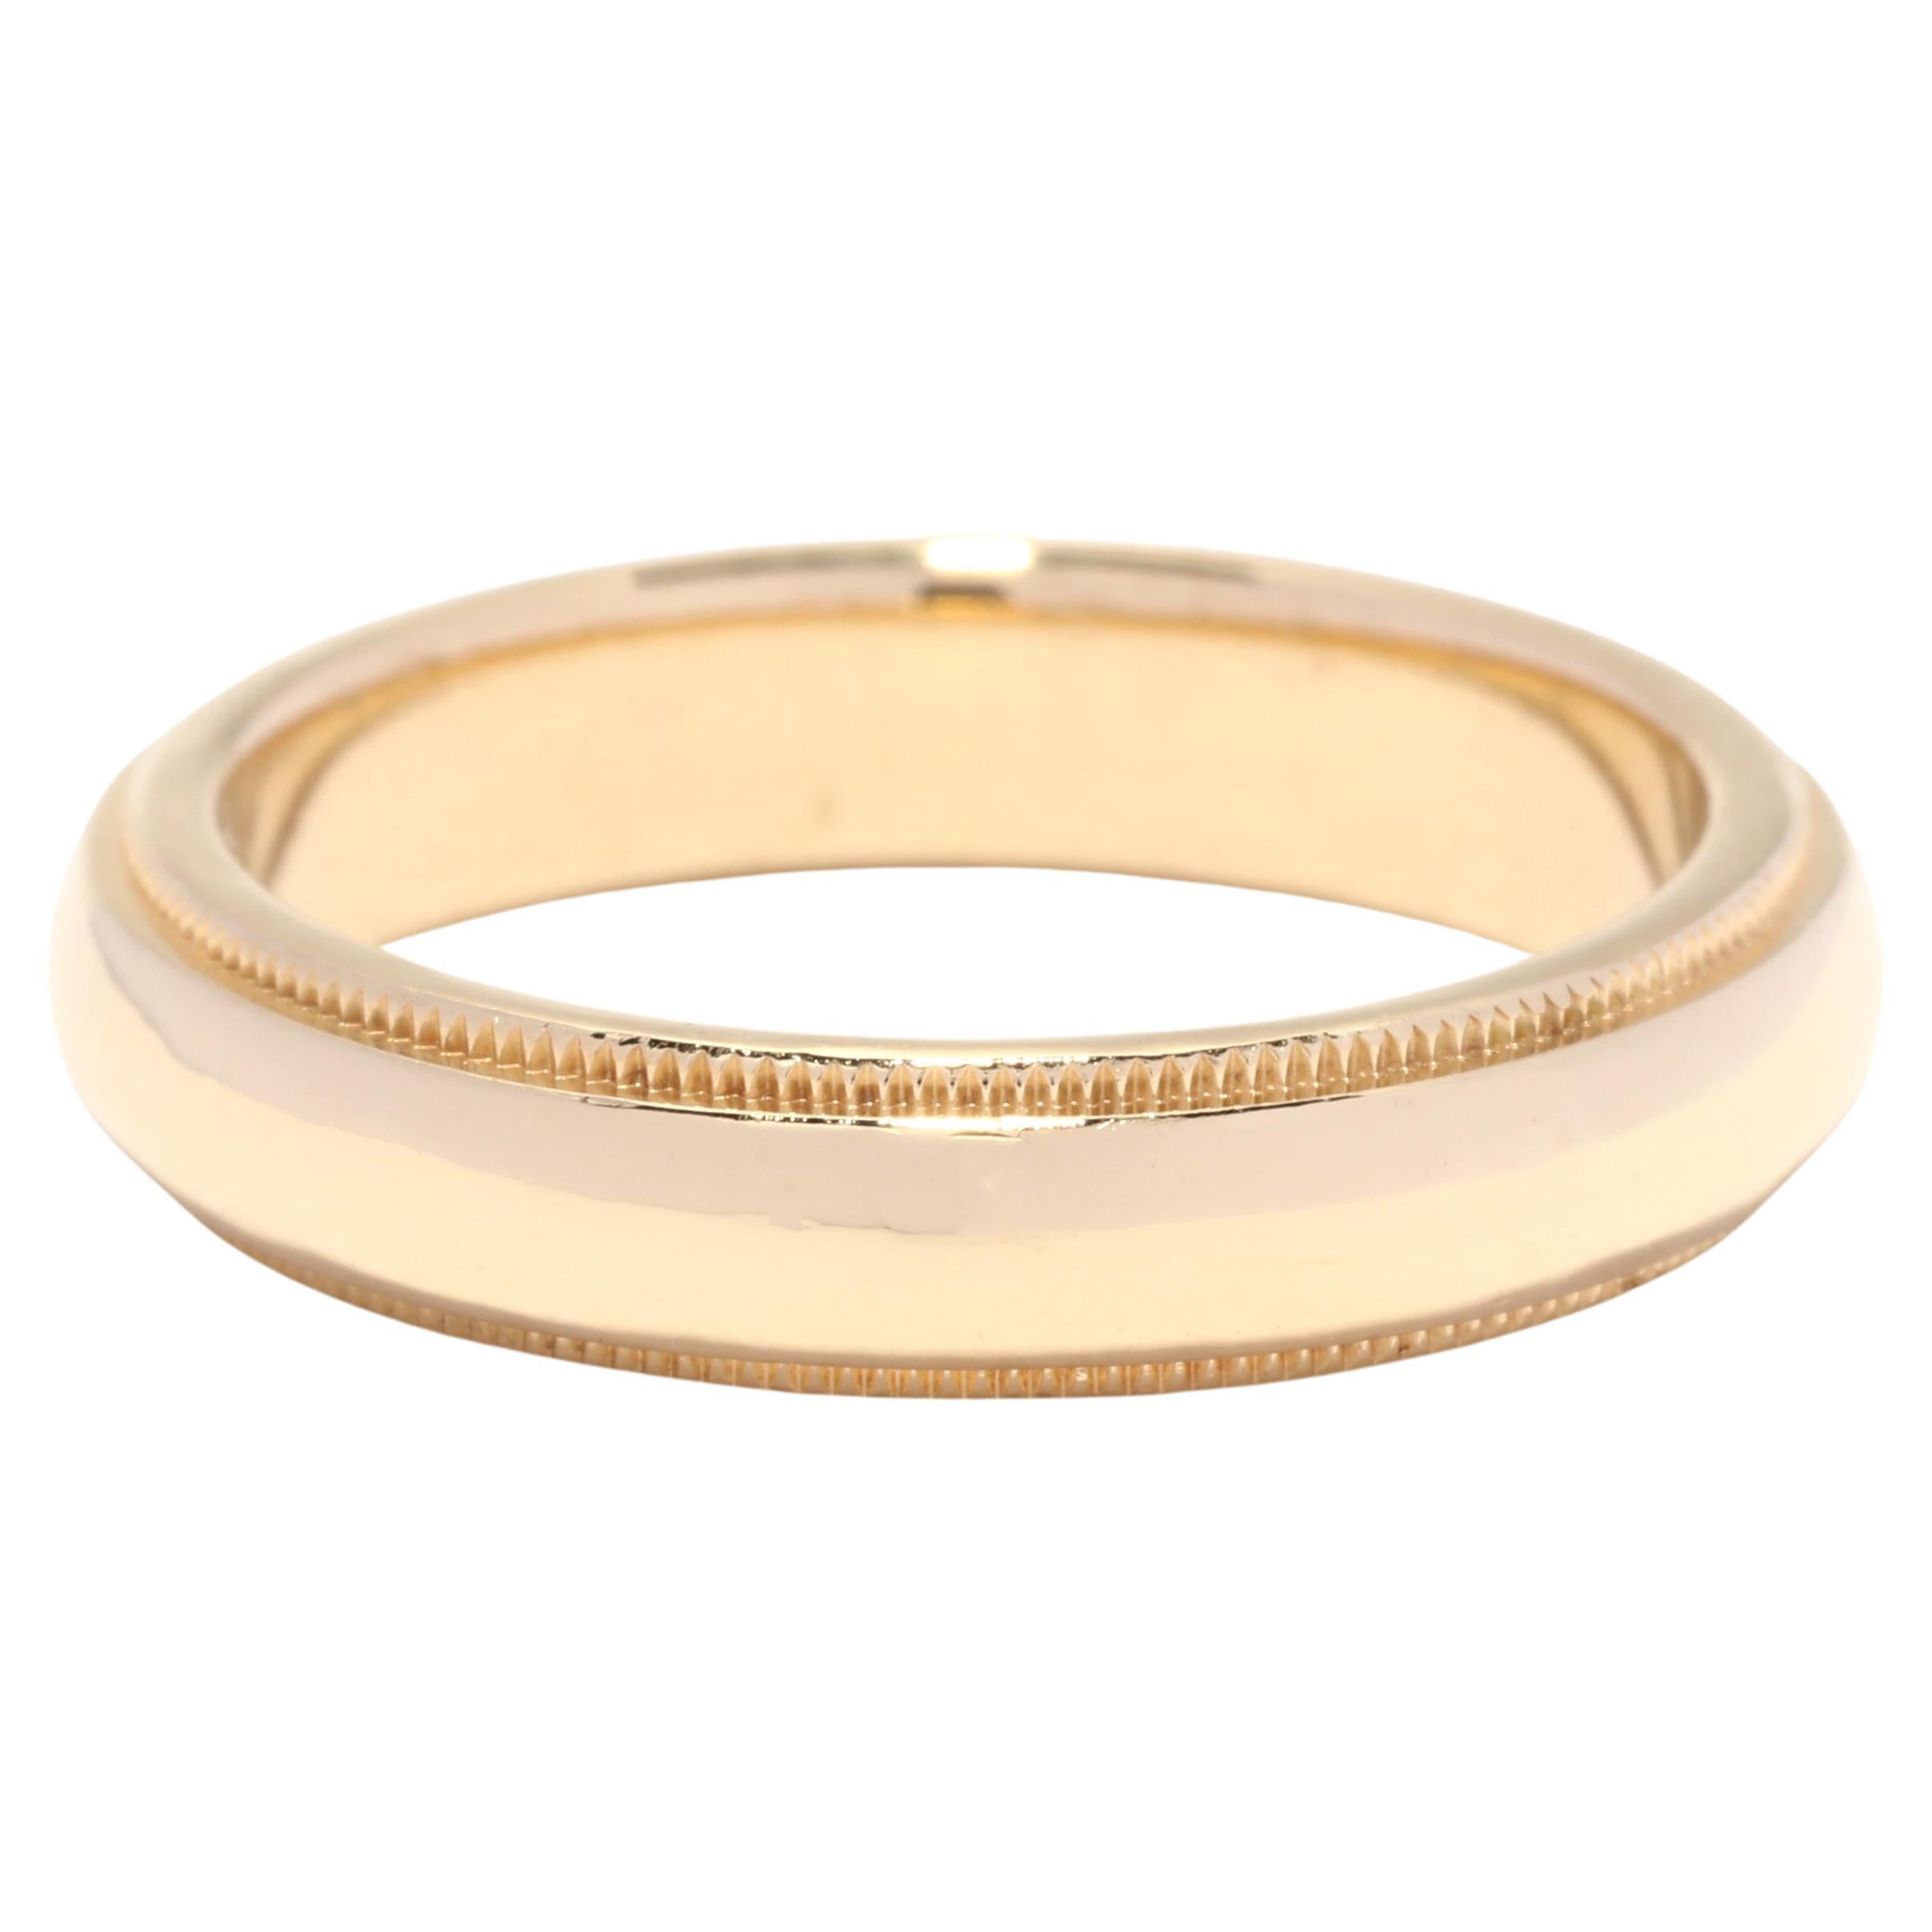 Tiffany and Company Milgrain Wedding Band, 18K Yellow Gold, Ring Size 6.25 For Sale